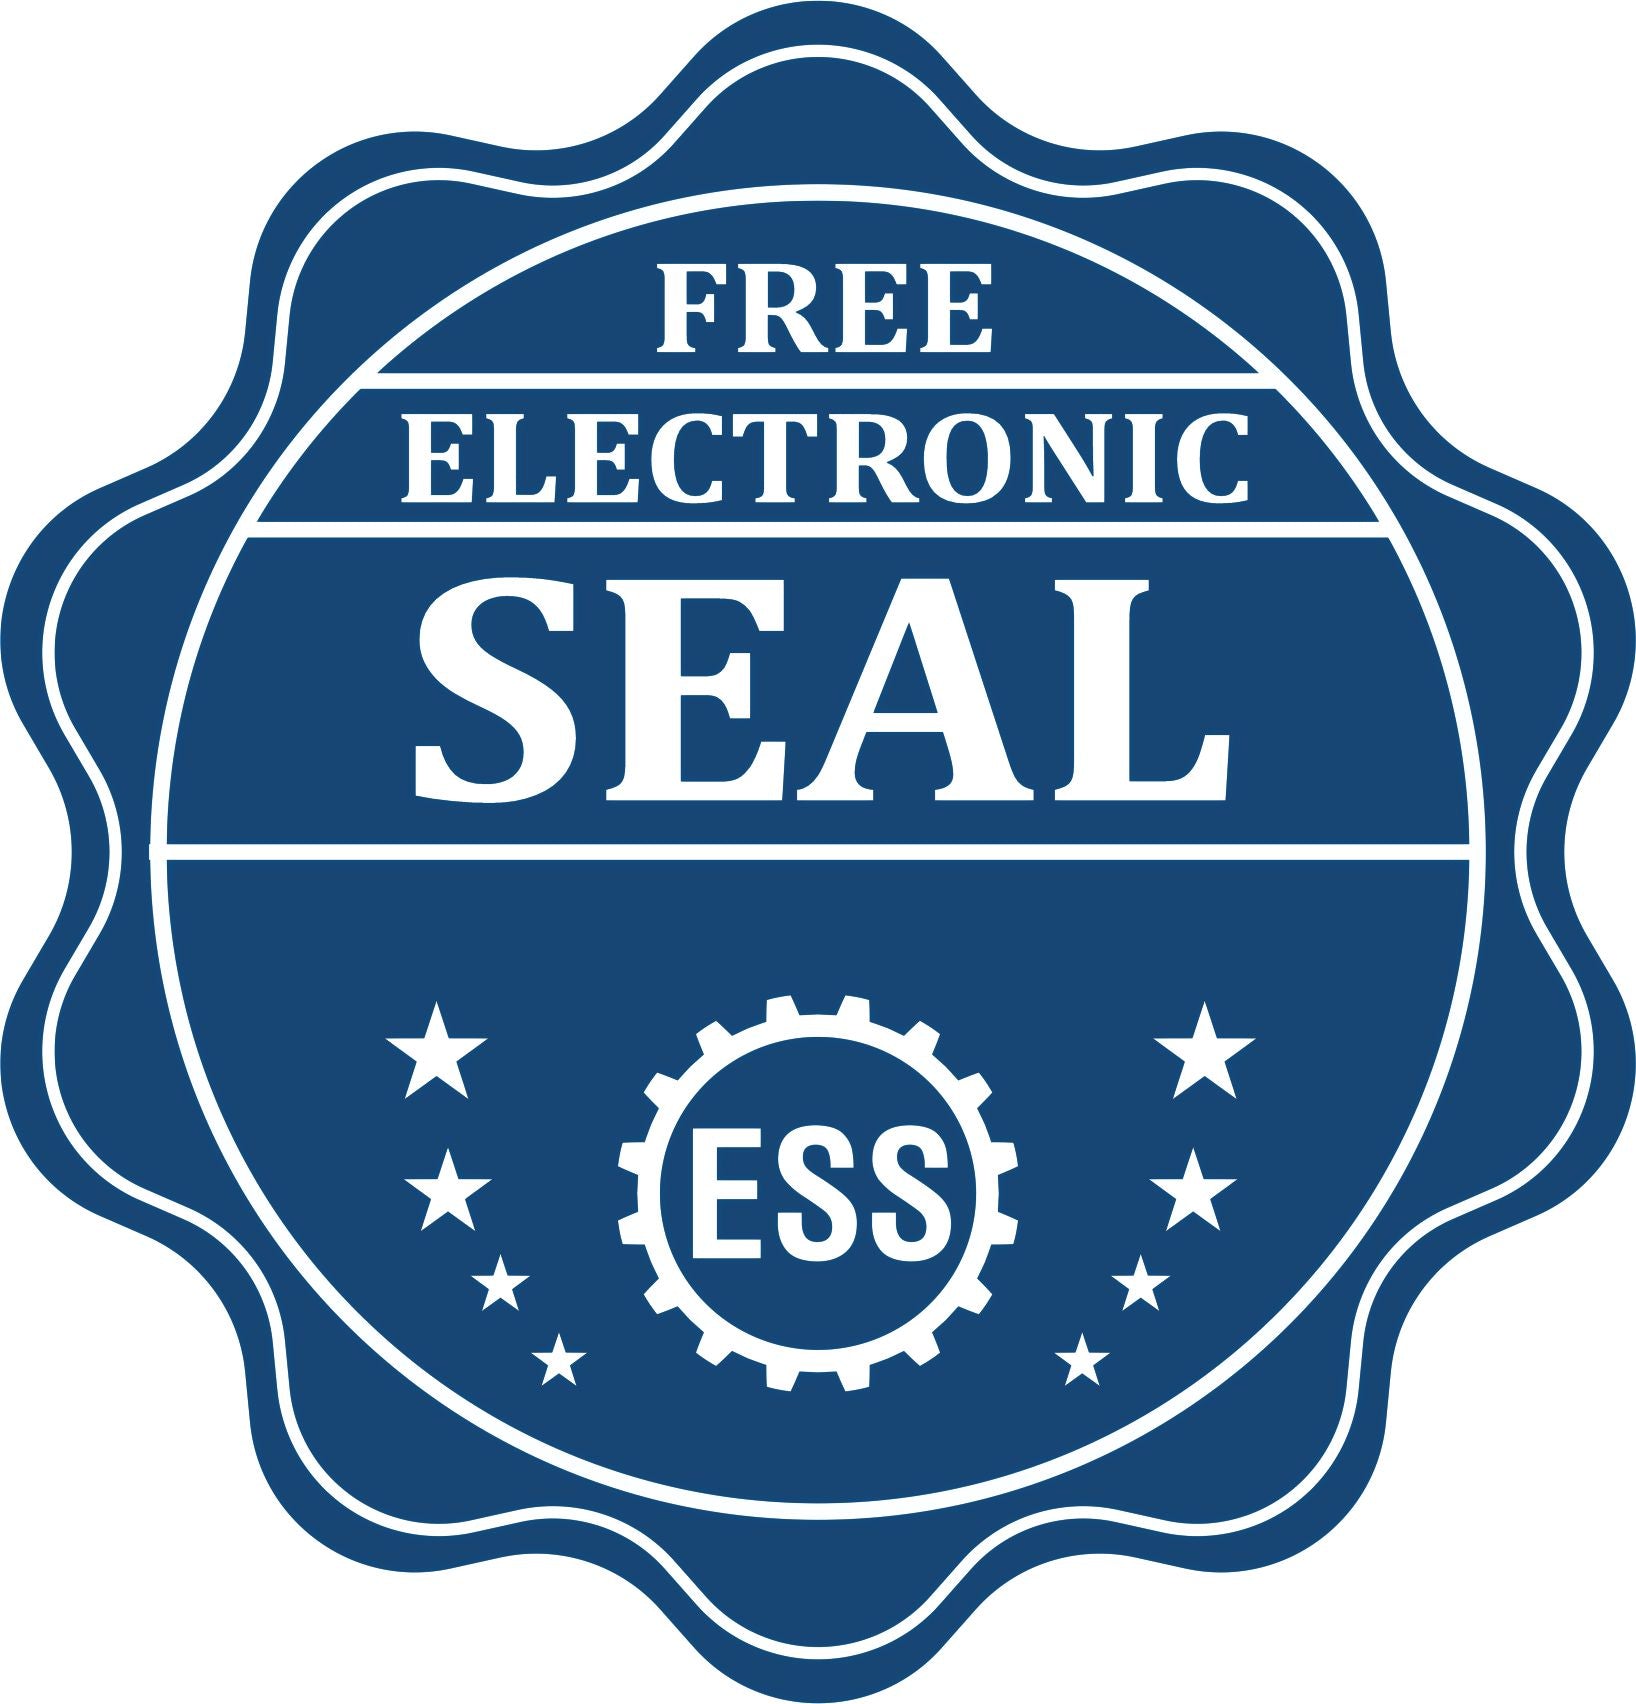 A badge showing a free electronic seal for the Gift Michigan Architect Seal with stars and the ESS gear on the emblem.